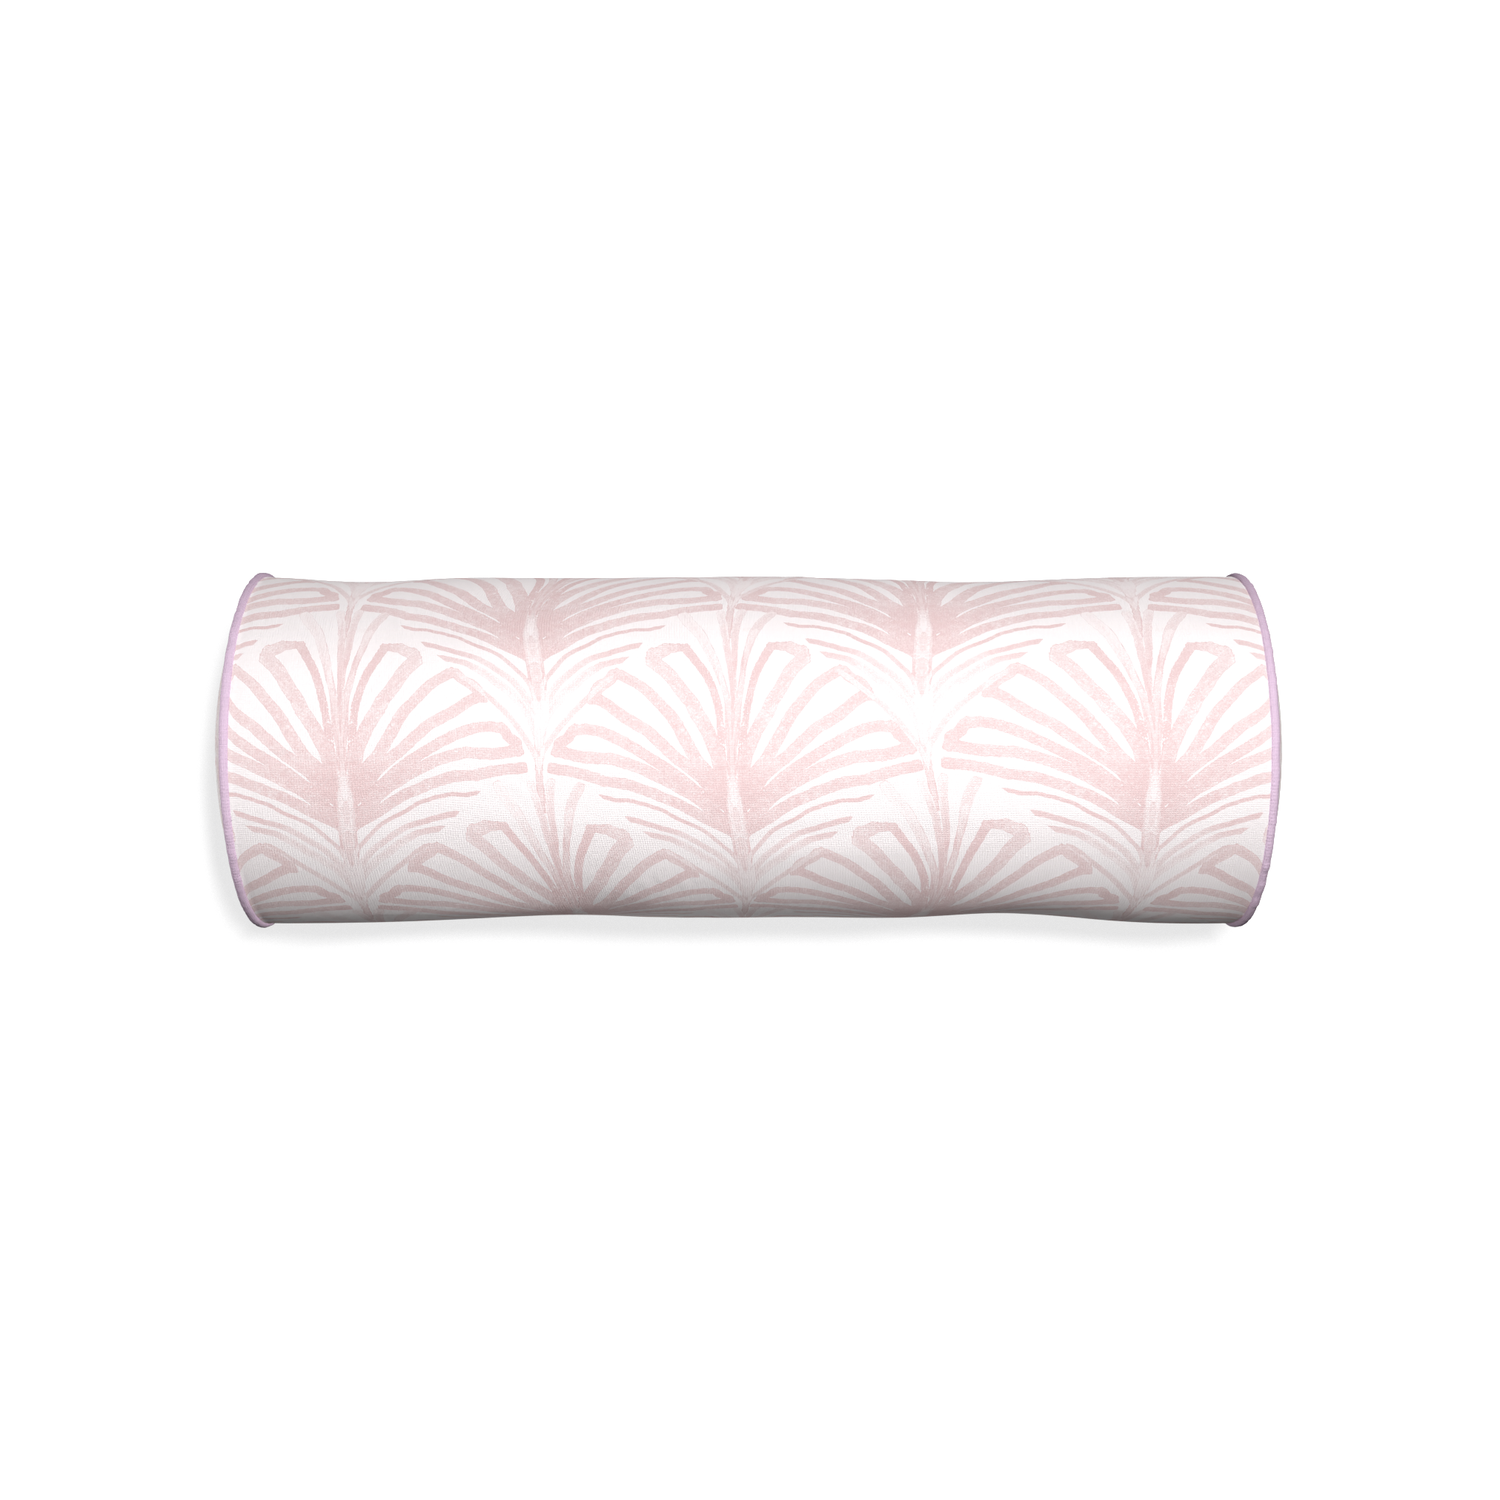 Bolster suzy rose custom pillow with l piping on white background